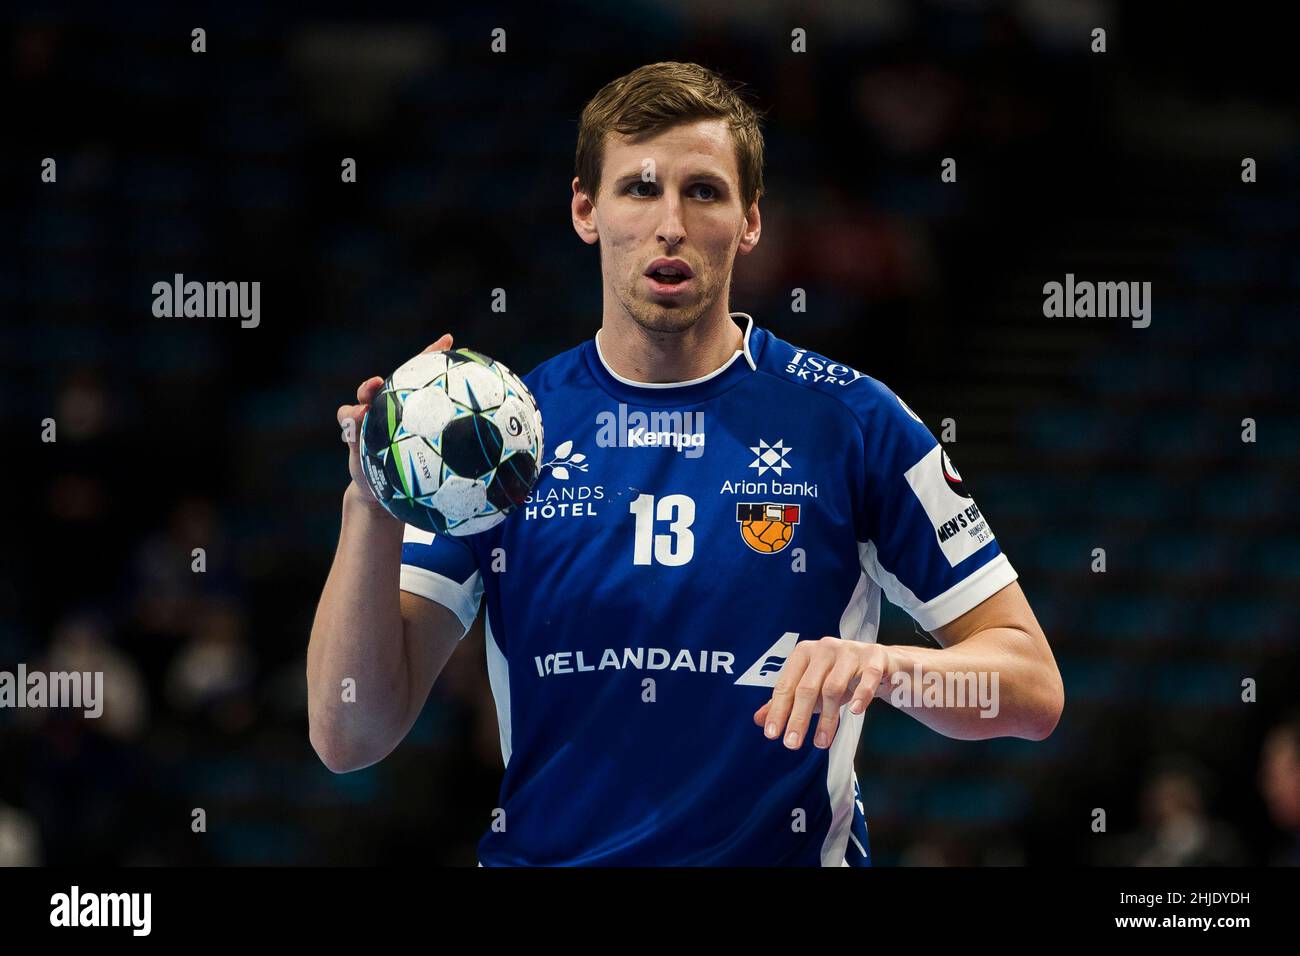 Budapest, Hungary, 28th January 2022. Olafur Andres Gudmundsson of Iceland in action during the Men's EHF EURO 2022, Fifth Place Match between Iceland v Norway in Budapest, Hungary. January 28, 2022. Credit: Nikola Krstic/Alamy Stock Photo